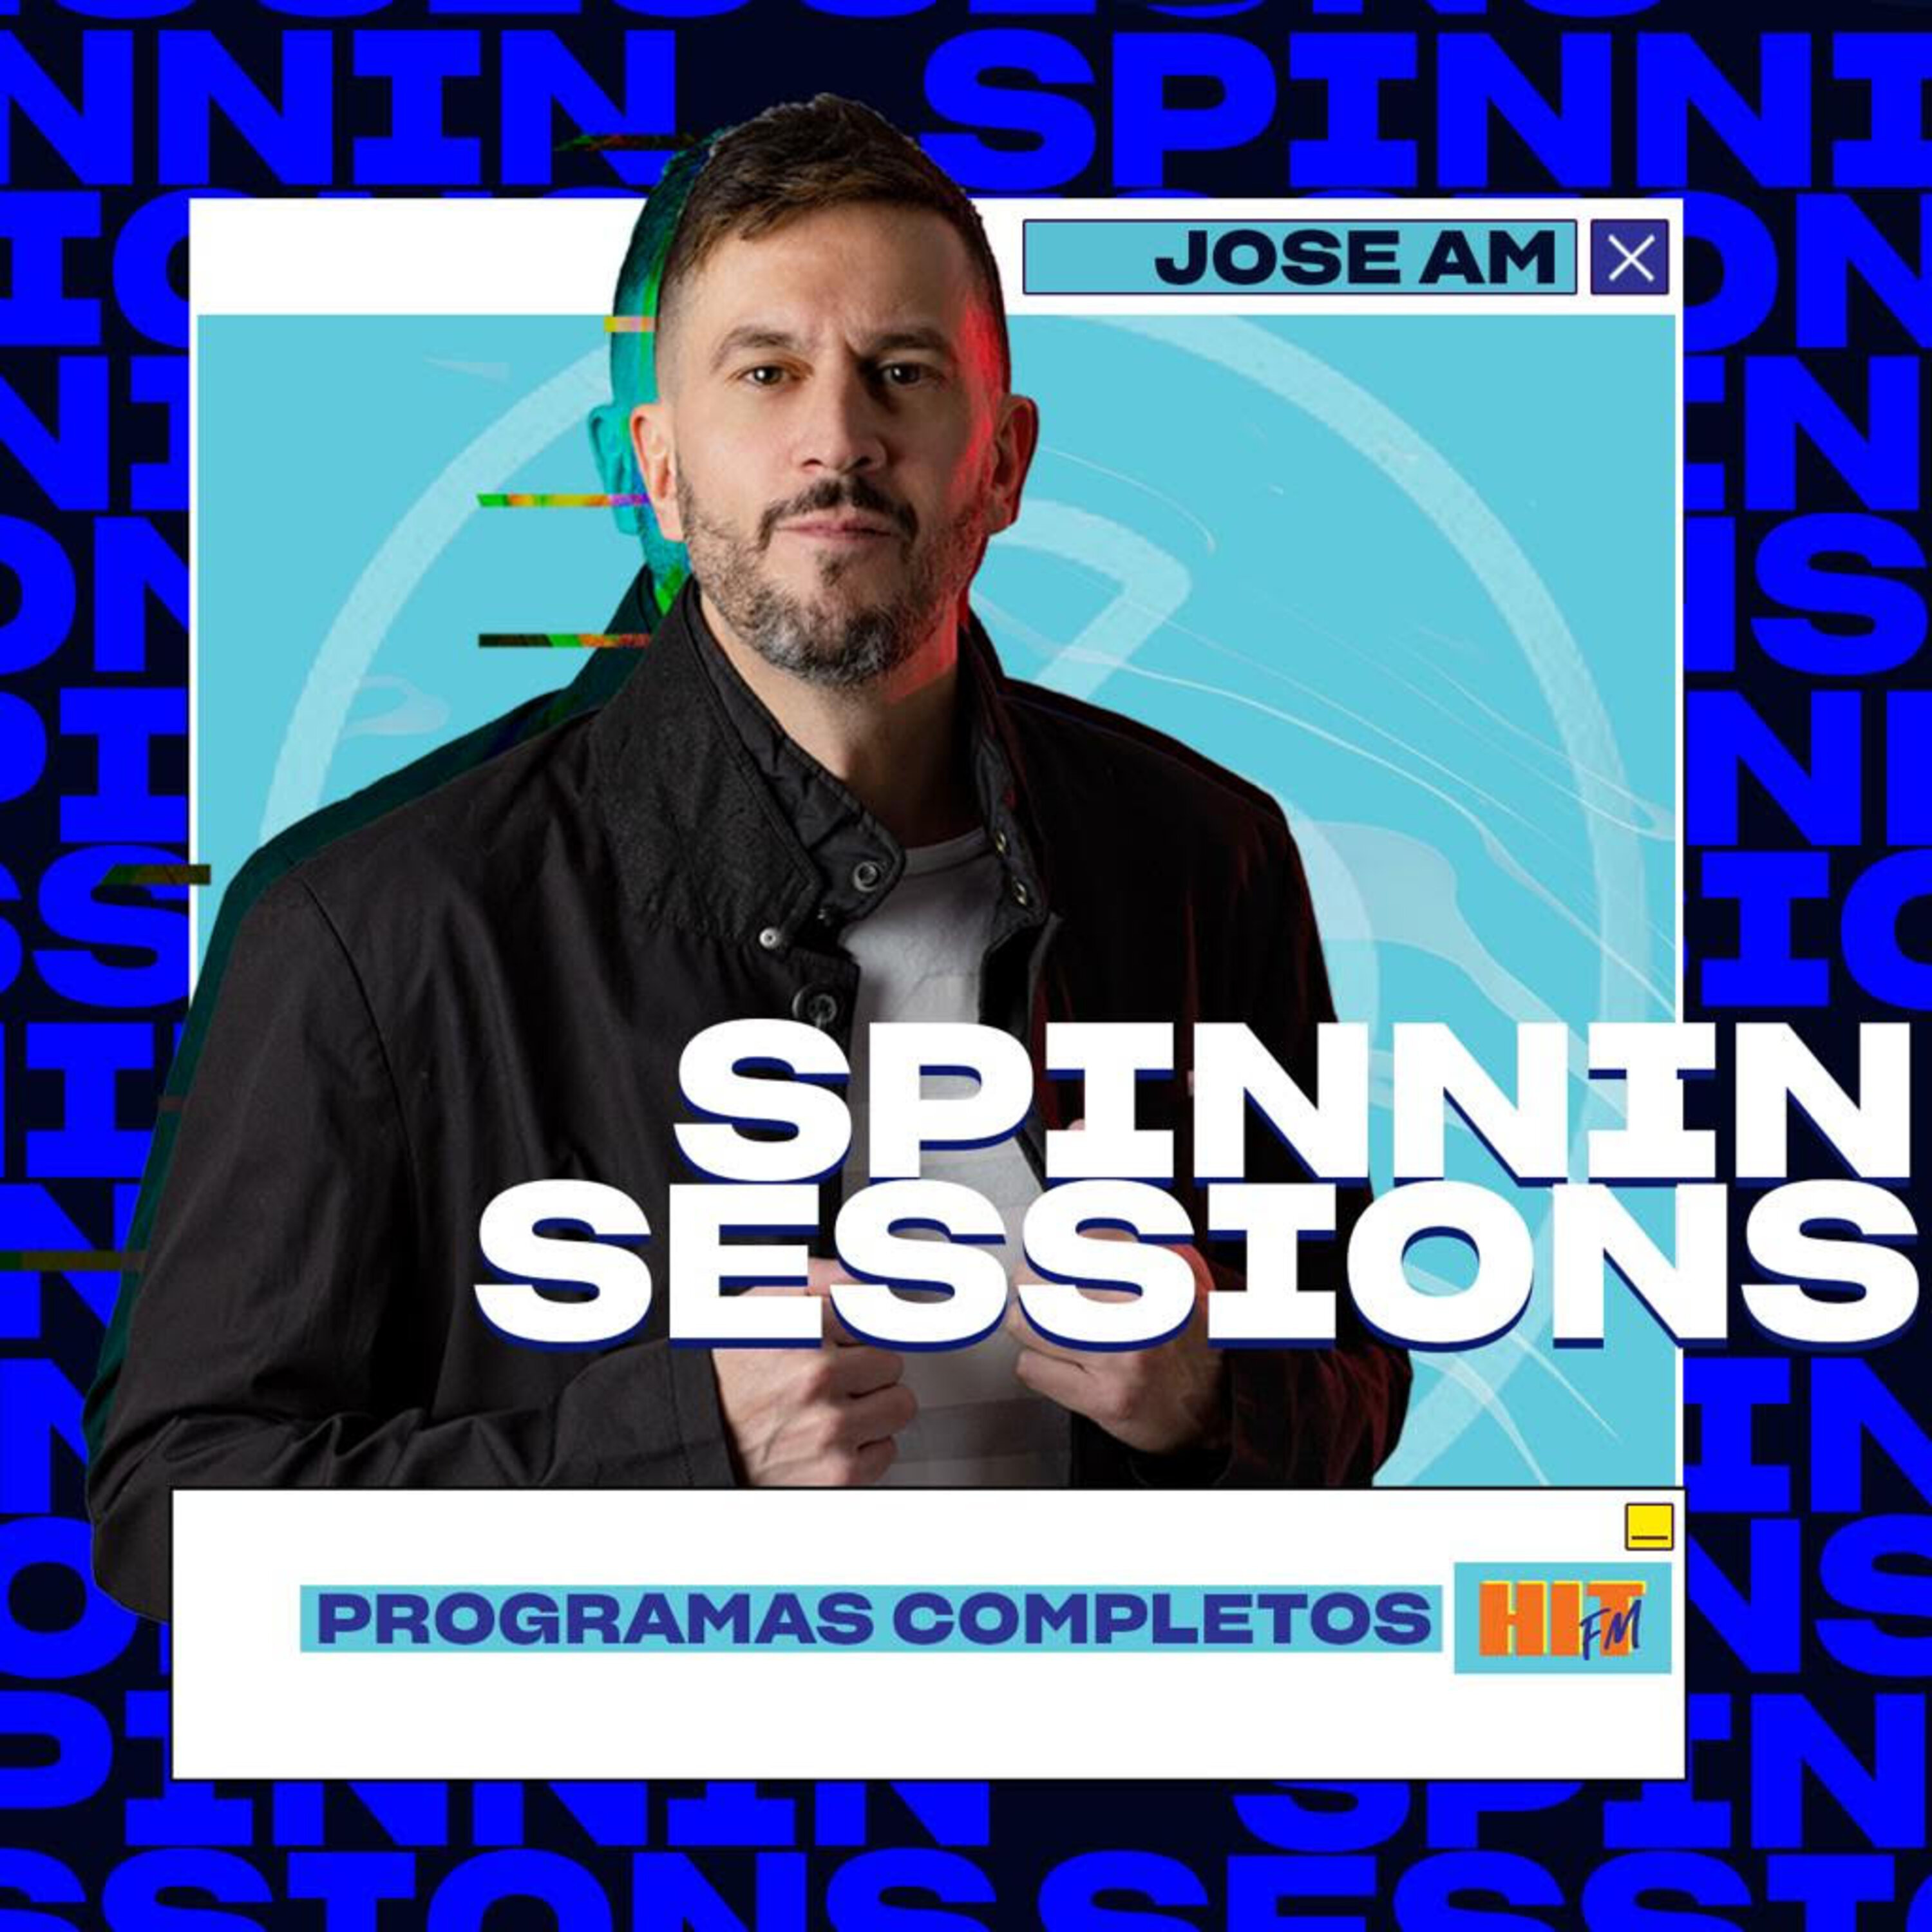 Spinnin Sessions con Jose AM (20/02/2022)